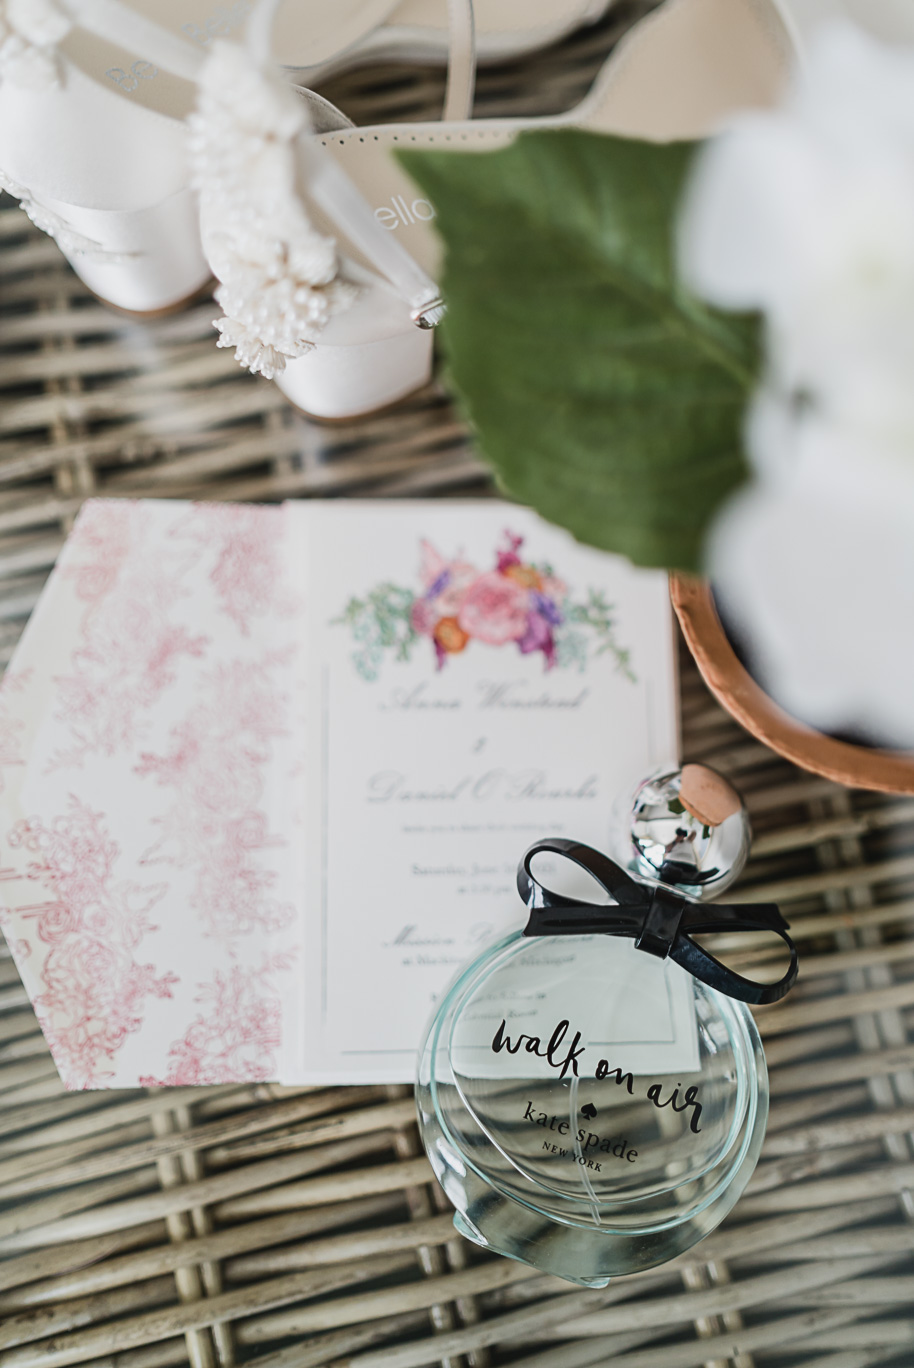 Kate Spade Walk on aIr perfume.

An intimate destination Mackinac Island wedding at Mission Point Resort with a cranberry and black color palette provided by Kari Dawson, top-rated Northern Michigan wedding photographer, and her team.